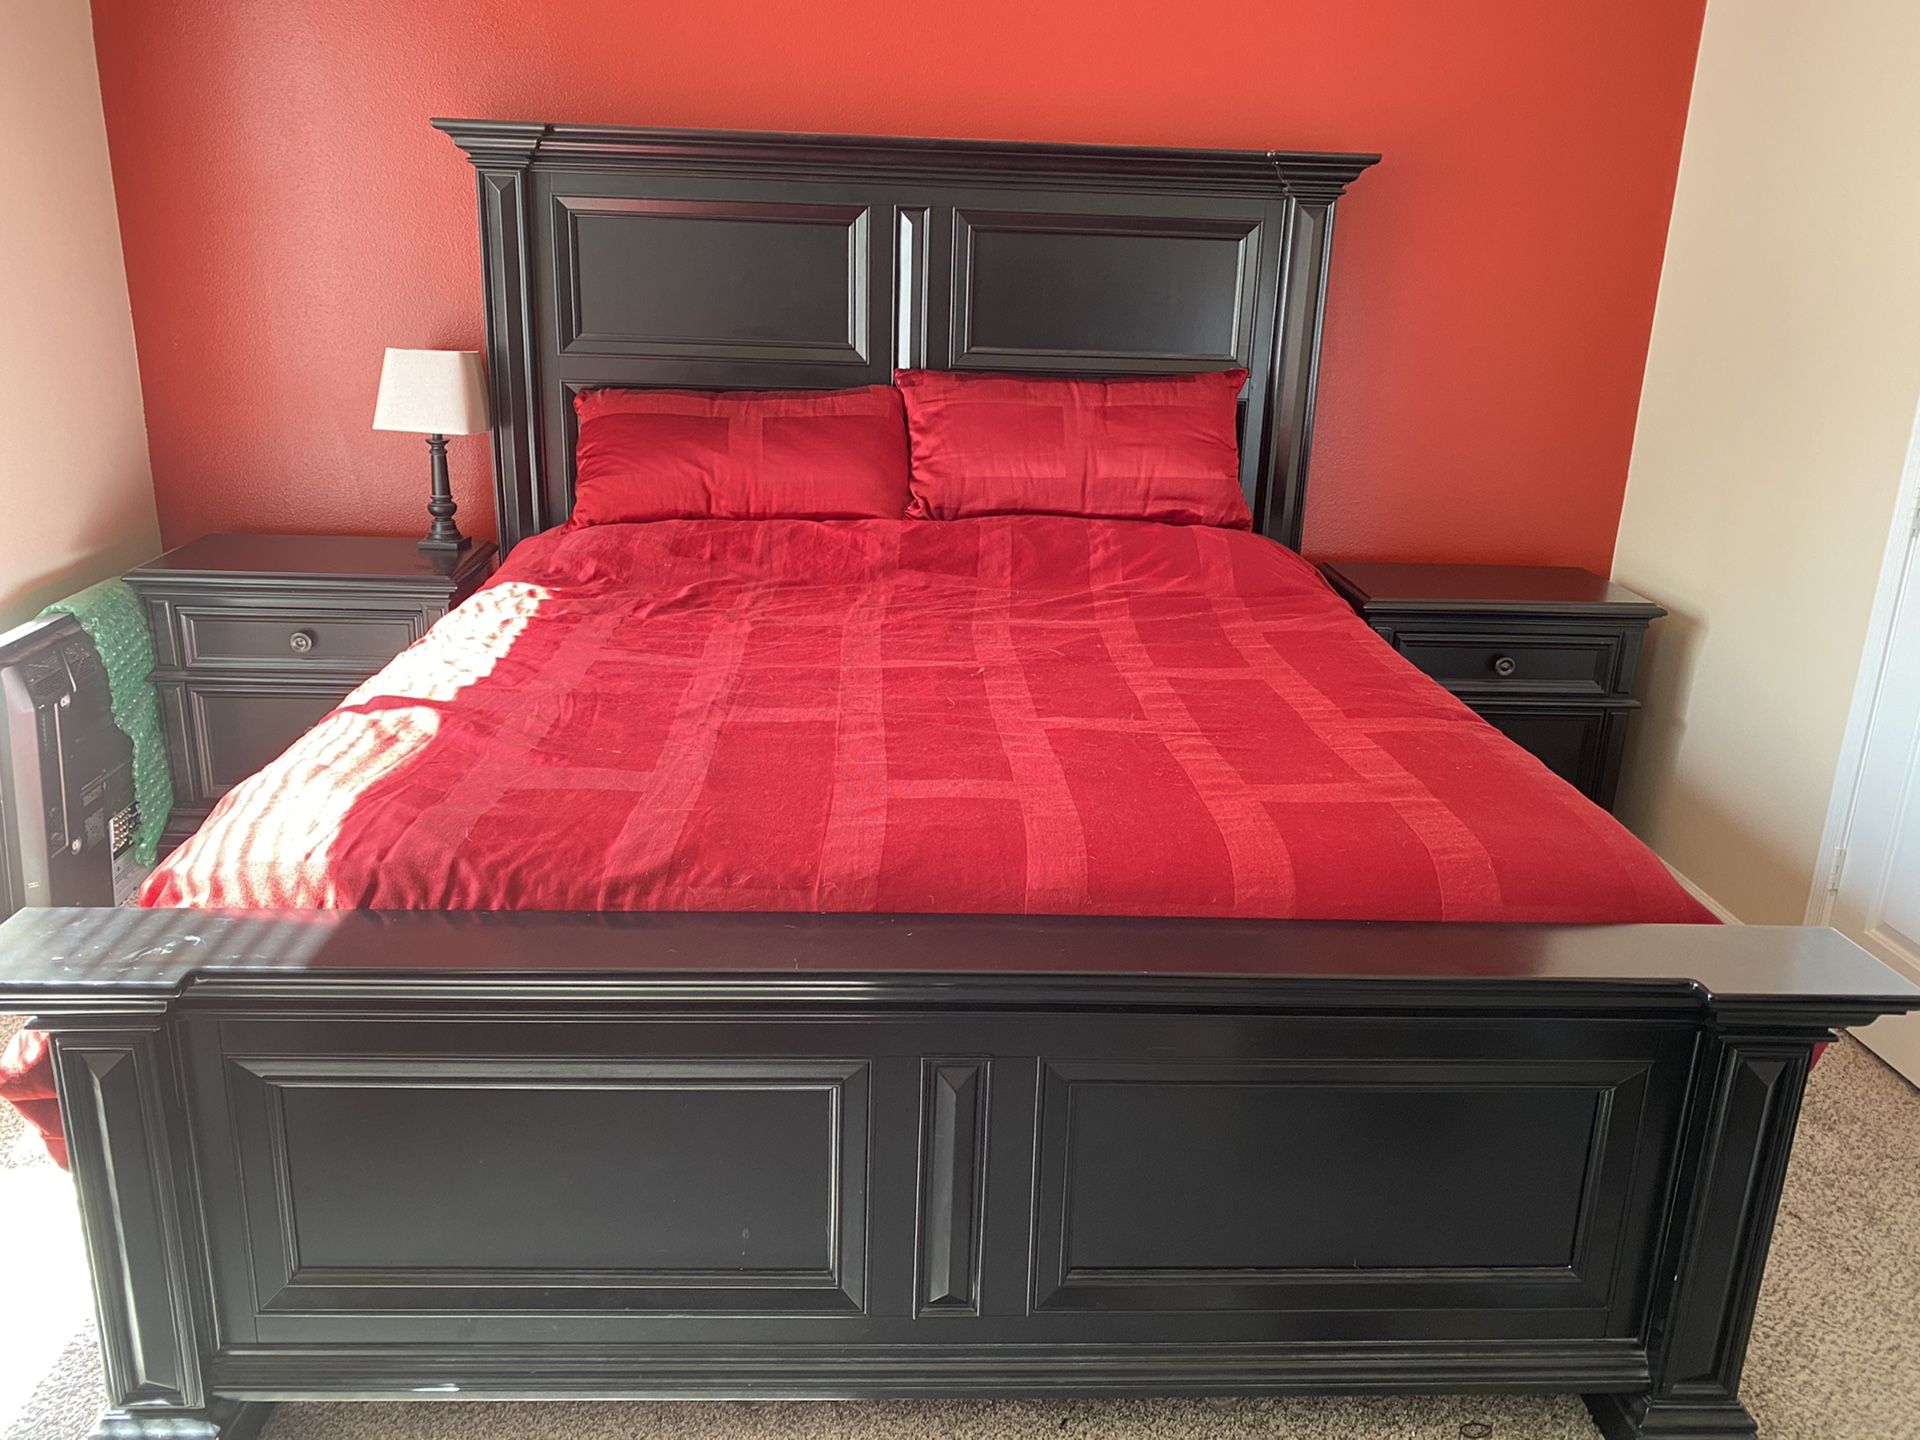 Full King Size Bedroom Set - Free if you pick it up on Wednesday!